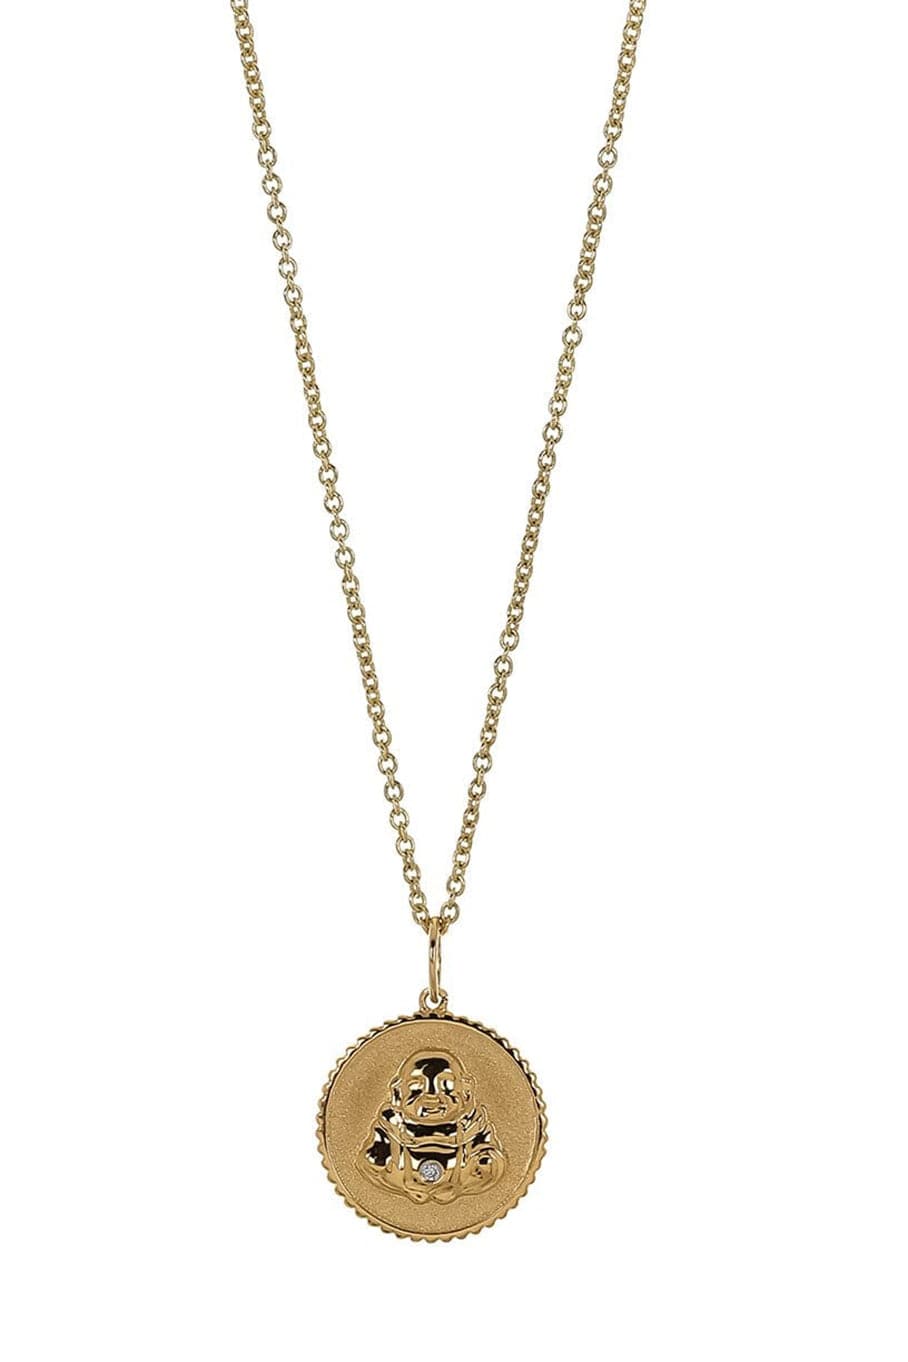 SYDNEY EVAN-Small Gold Sitting Buddha Coin Necklace-YELLOW GOLD